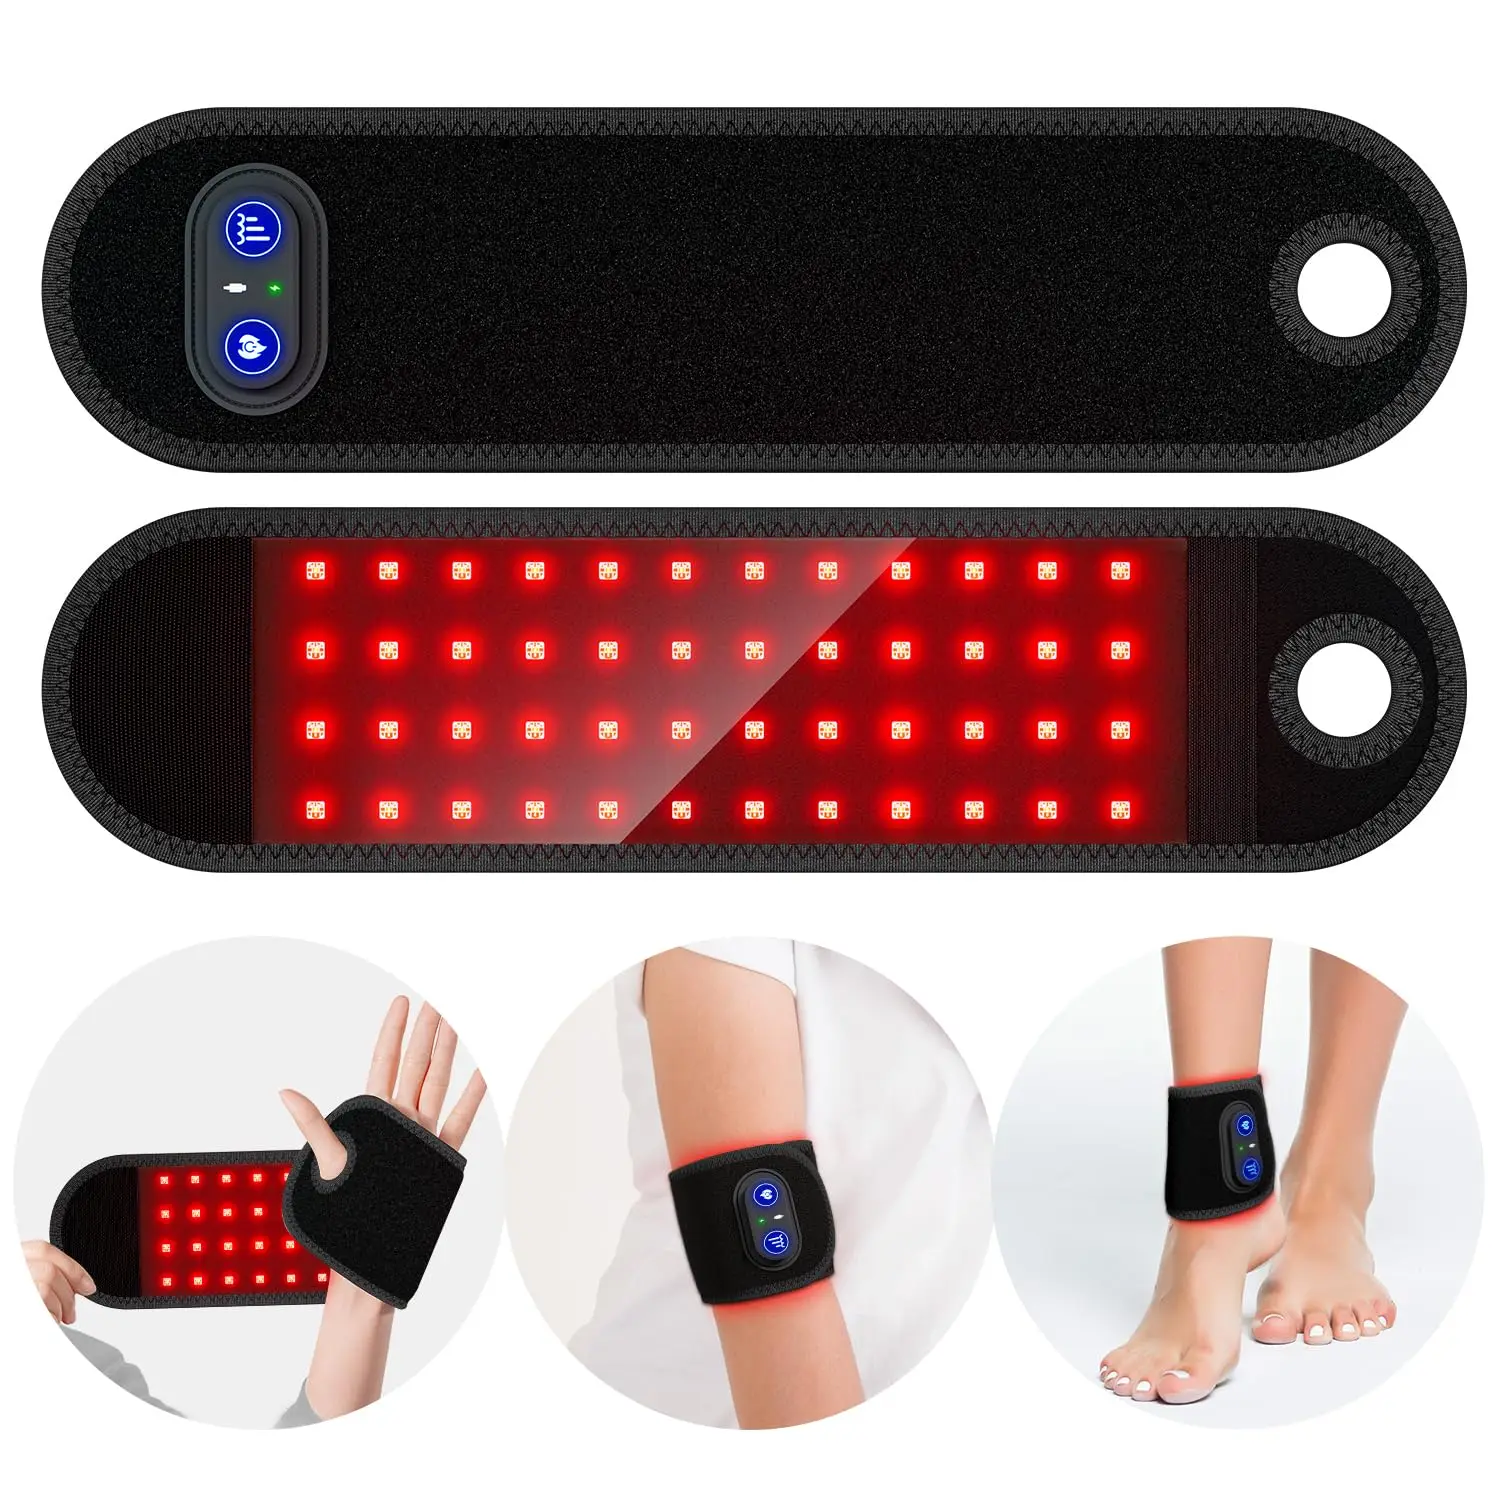 tenosynovitis-brace-red-light-therapy-wearable-red-light-therapy-wrist-support-brace-hand-massager-660nm-850nm-led-lights